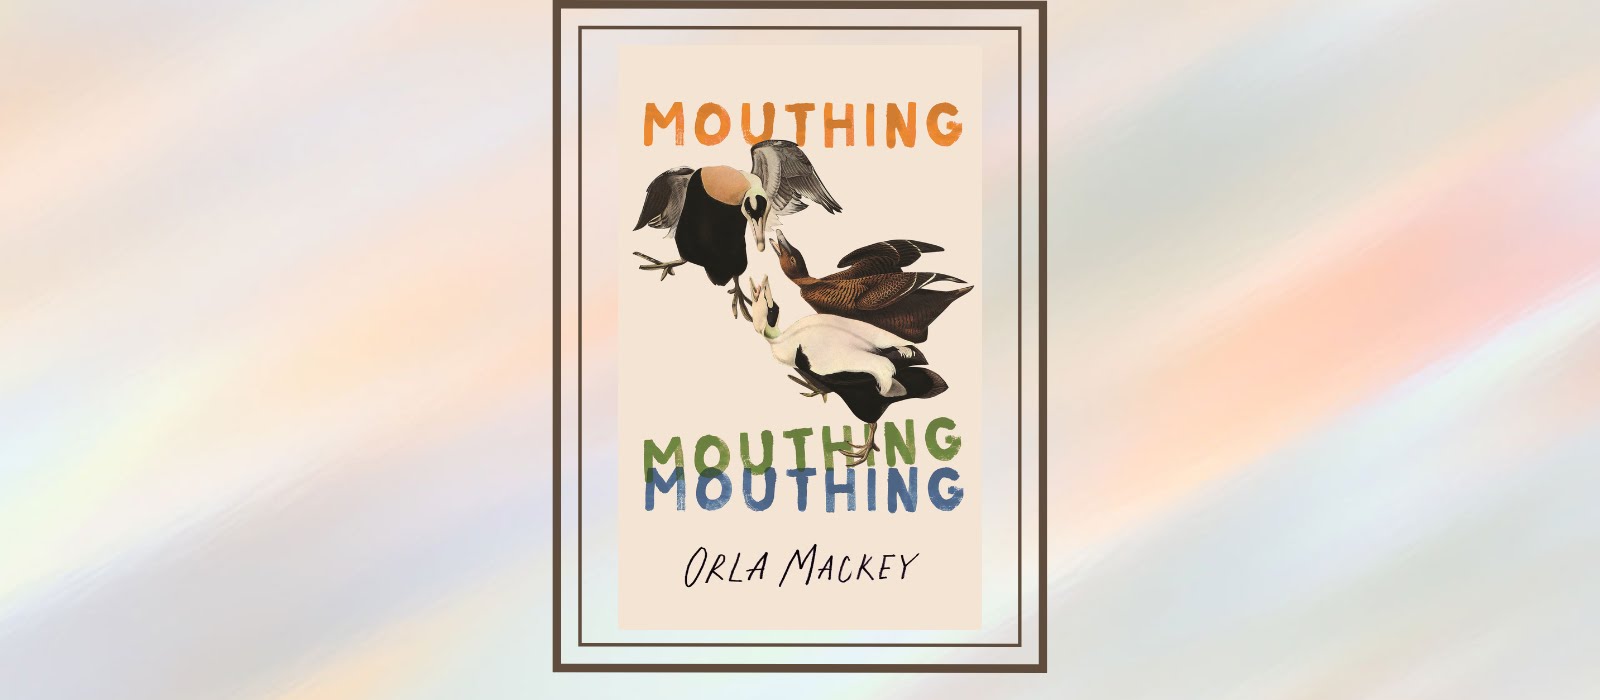 Read an extract from Orla Mackey’s debut, Mouthing